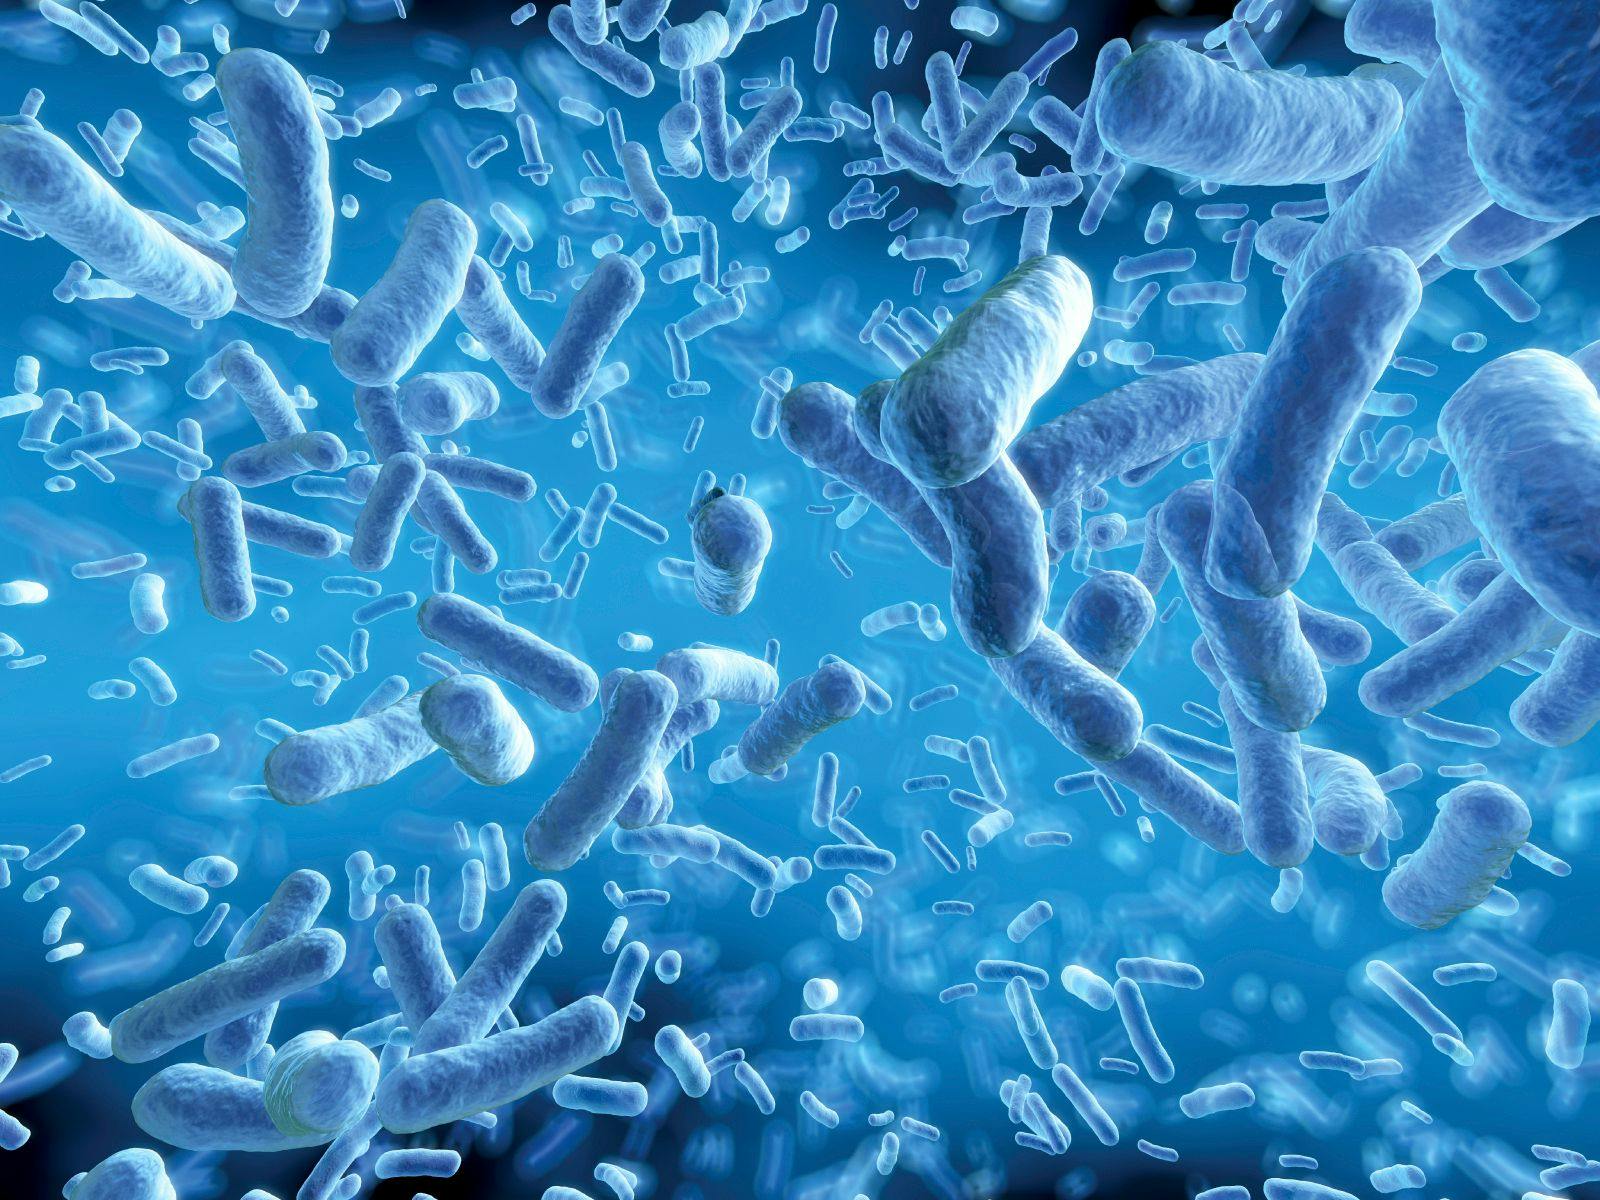 First Dose-Response Study Shows Probiotic Benefits for Antibiotic-Associated Diarrhea